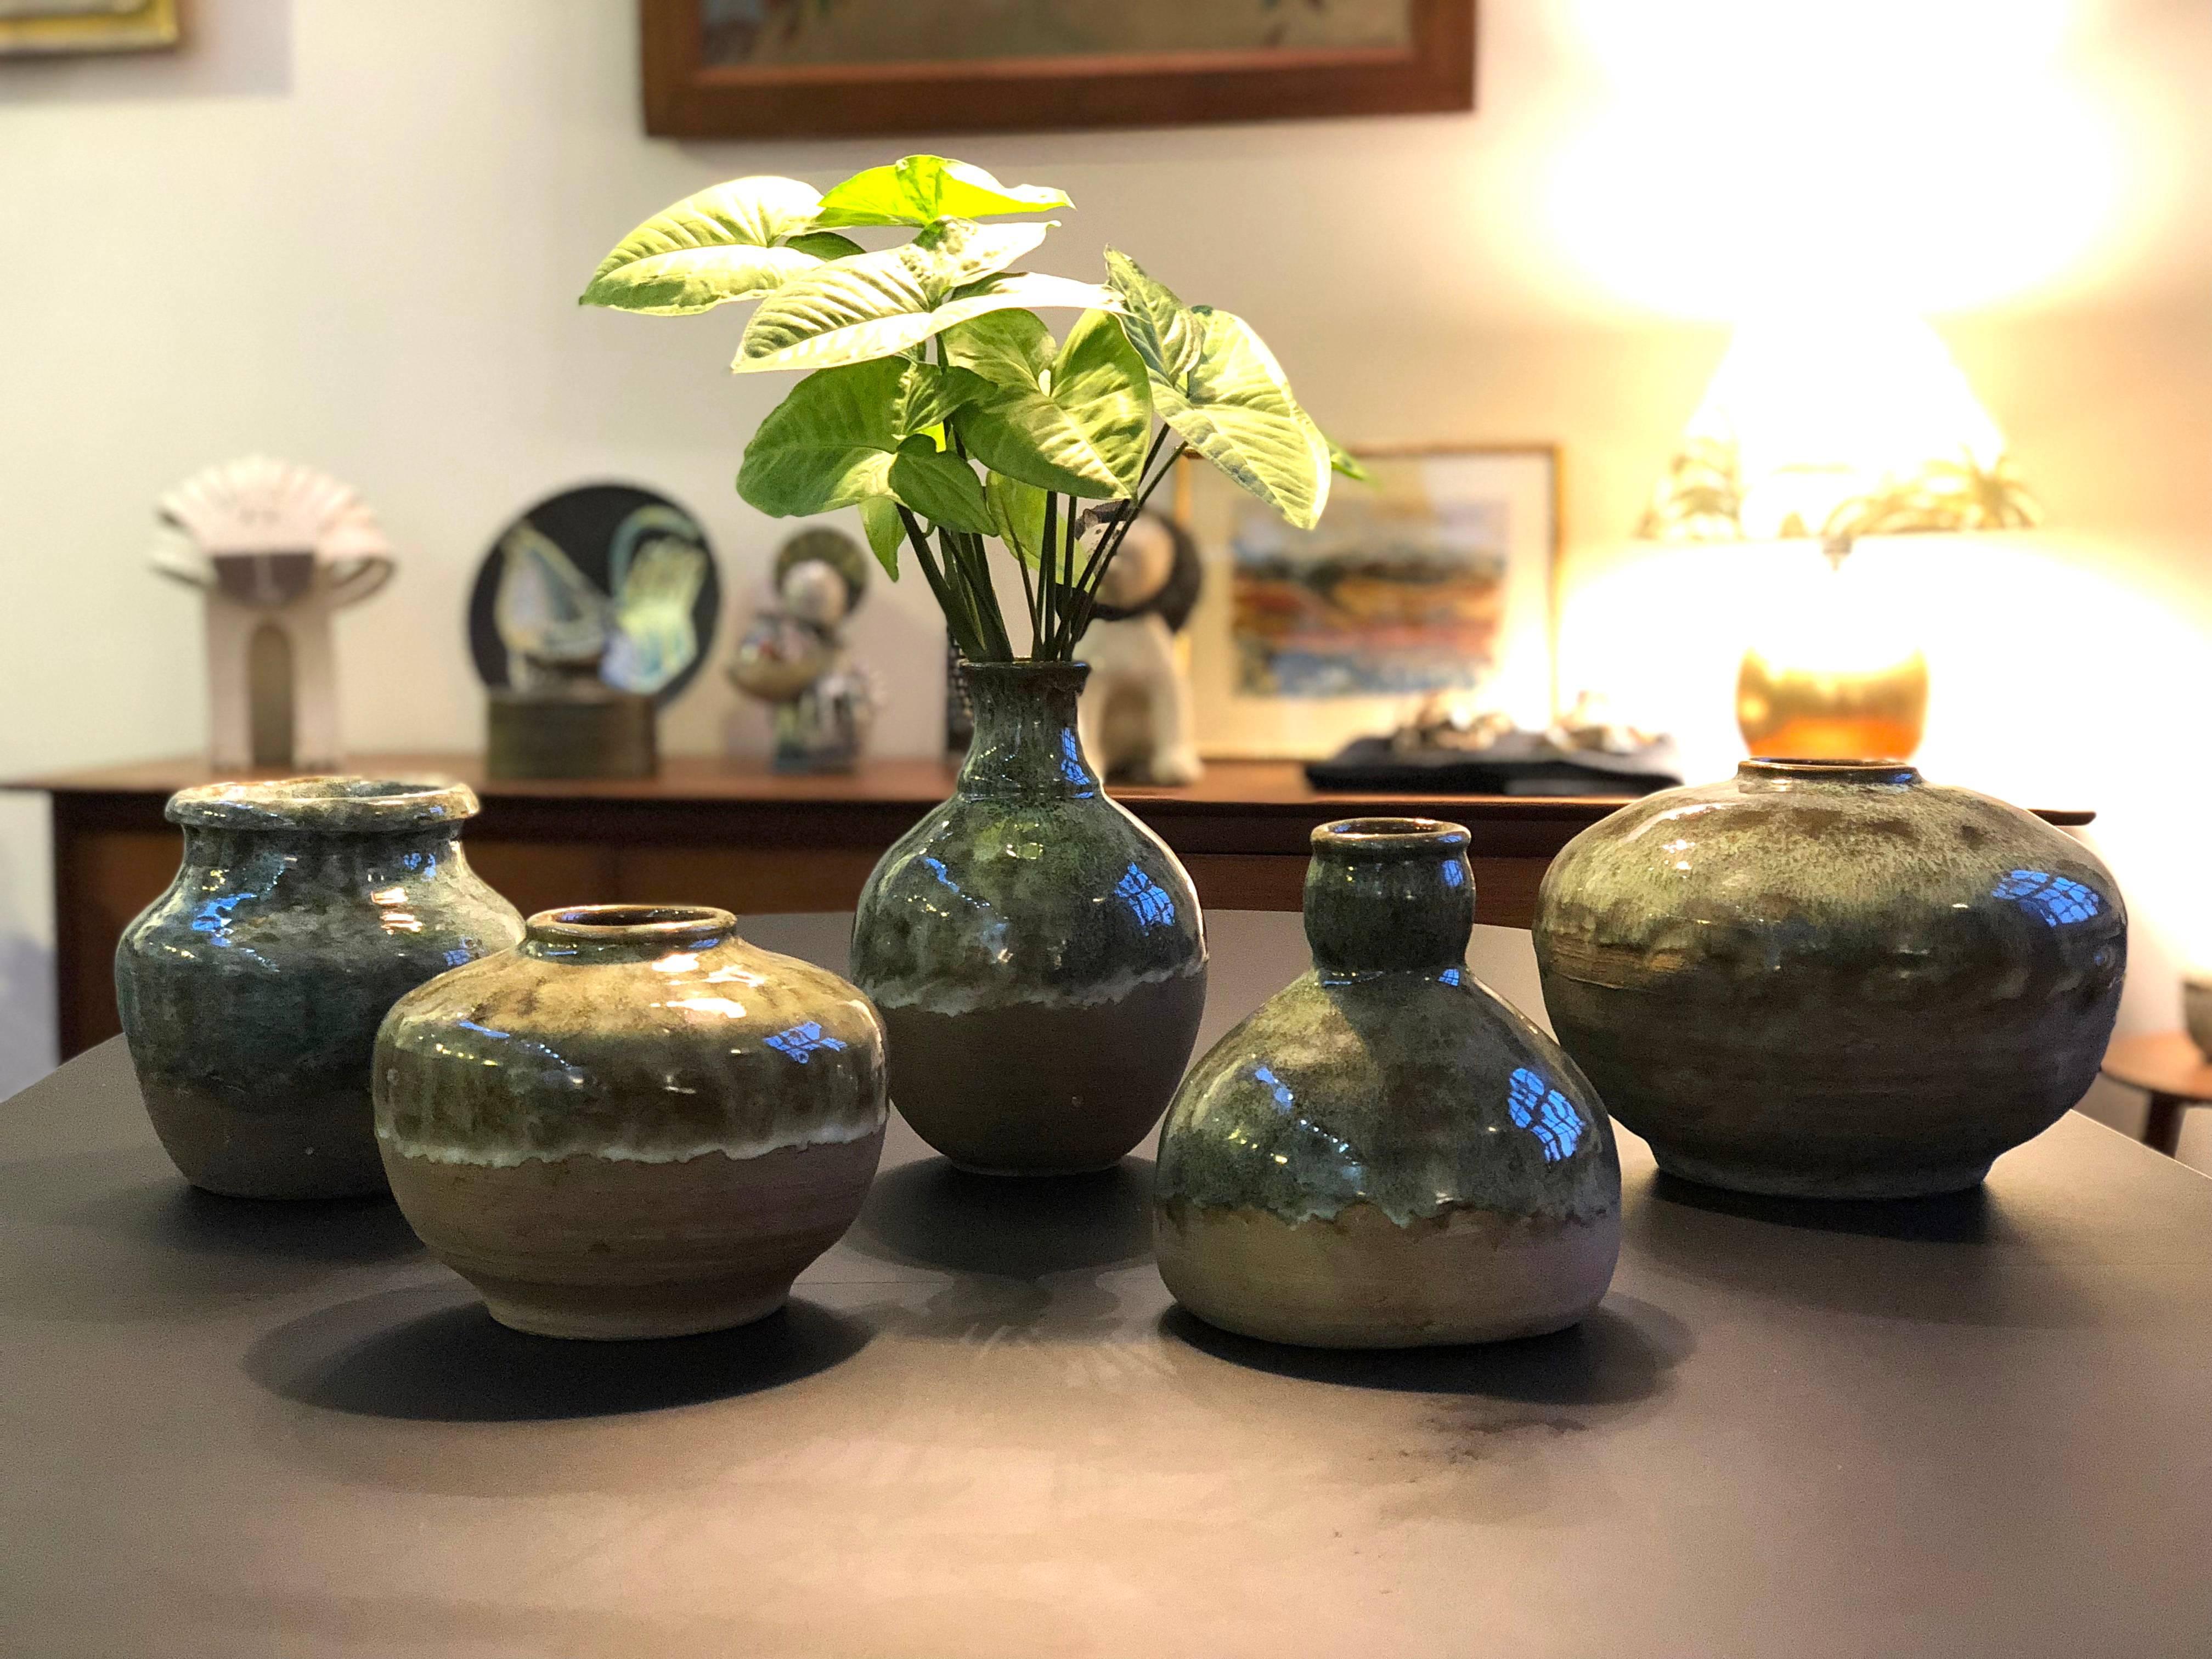 Mid-century Spanish ceramic collection by VF (circa 1960s). A collectible series of five beautiful Spanish ceramic vases and vessels. The tops of the pieces are with shiny glaze and drip effect over plane earthenware clay base. The contrast of the